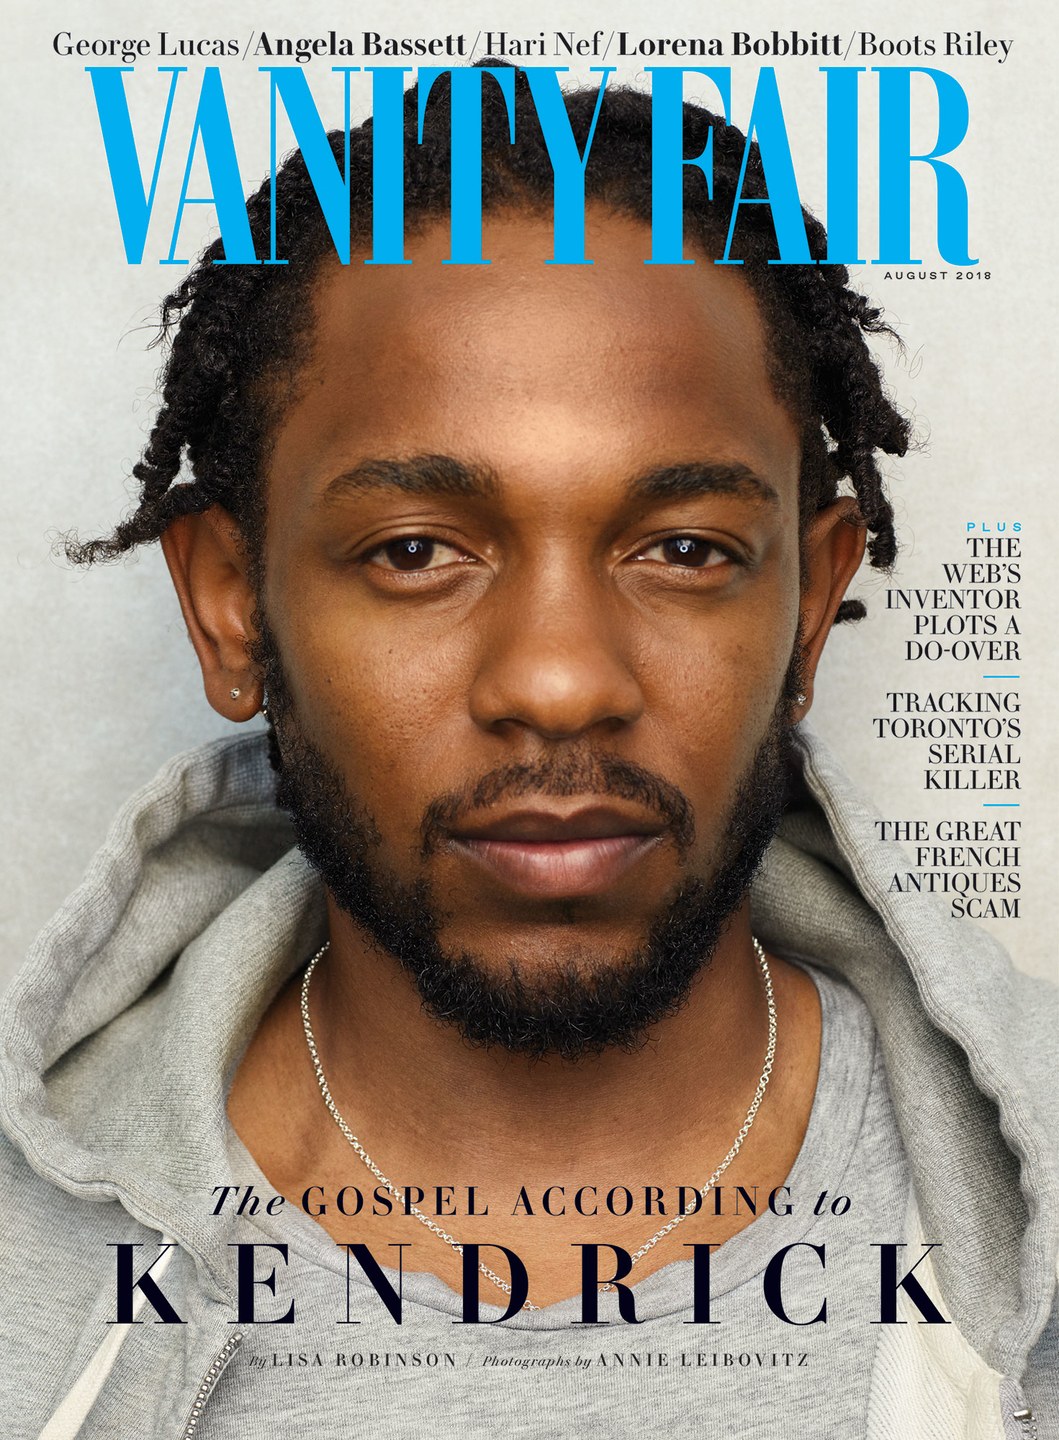 Annie Leibovitz's portrait of Kendrick Lamar on the cover of Vanity Fair. All images courtesy of Vanity Fair